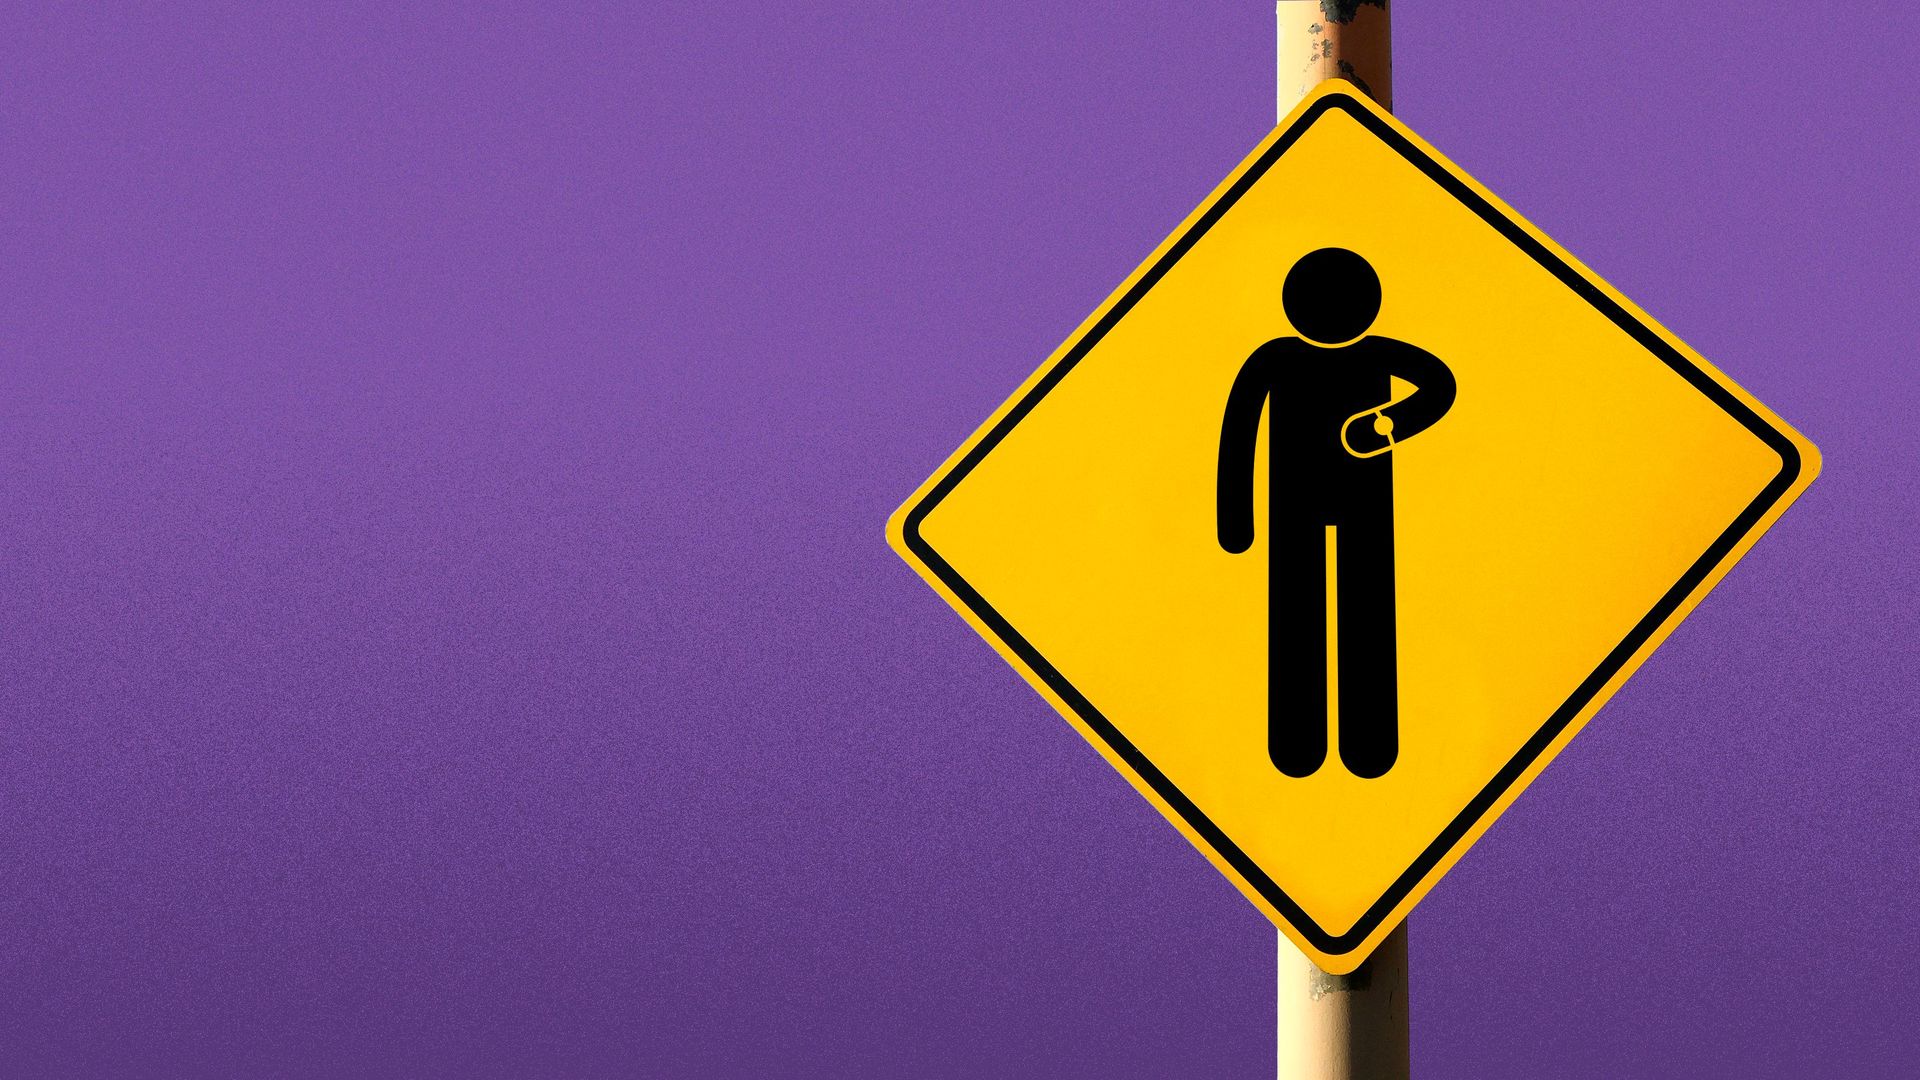 Illustration of a street sign with a person checking their watch.